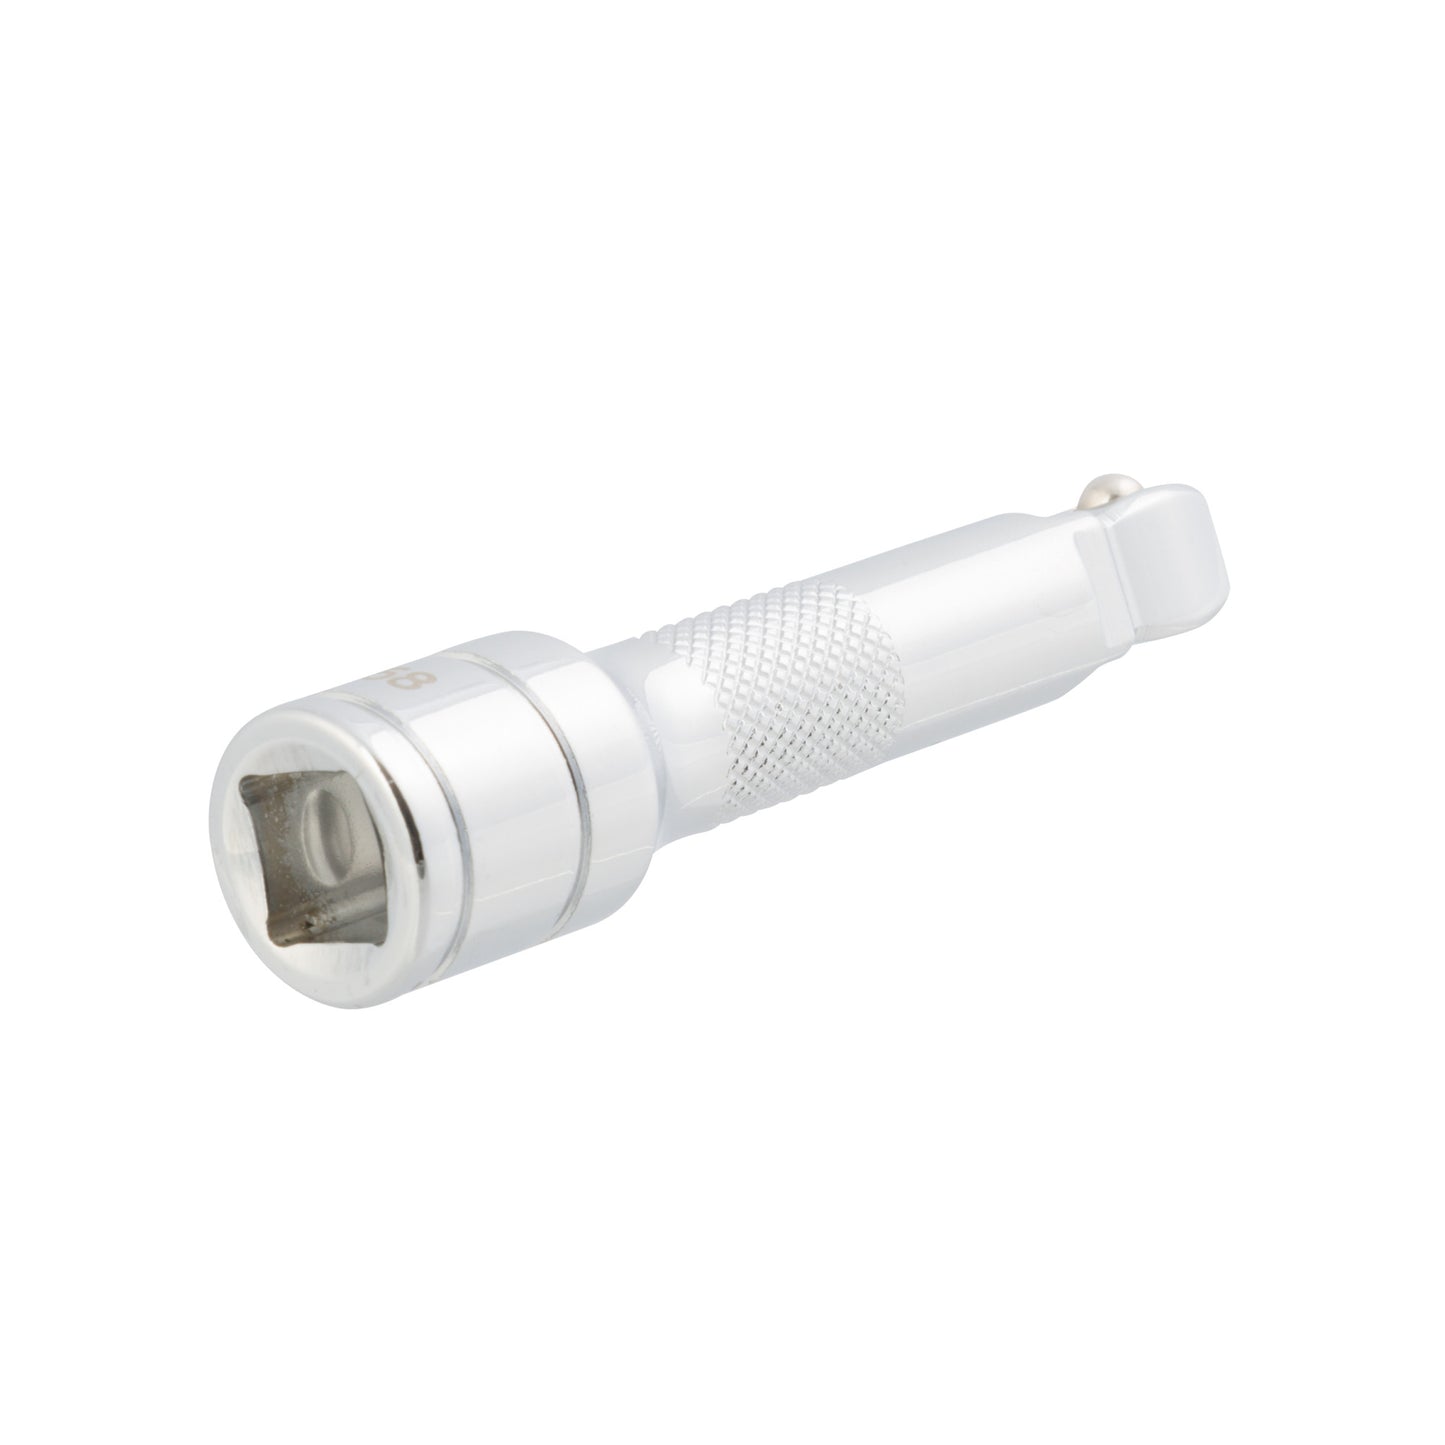 3/8-inch Drive x 3-inch Wobble Socket Extension